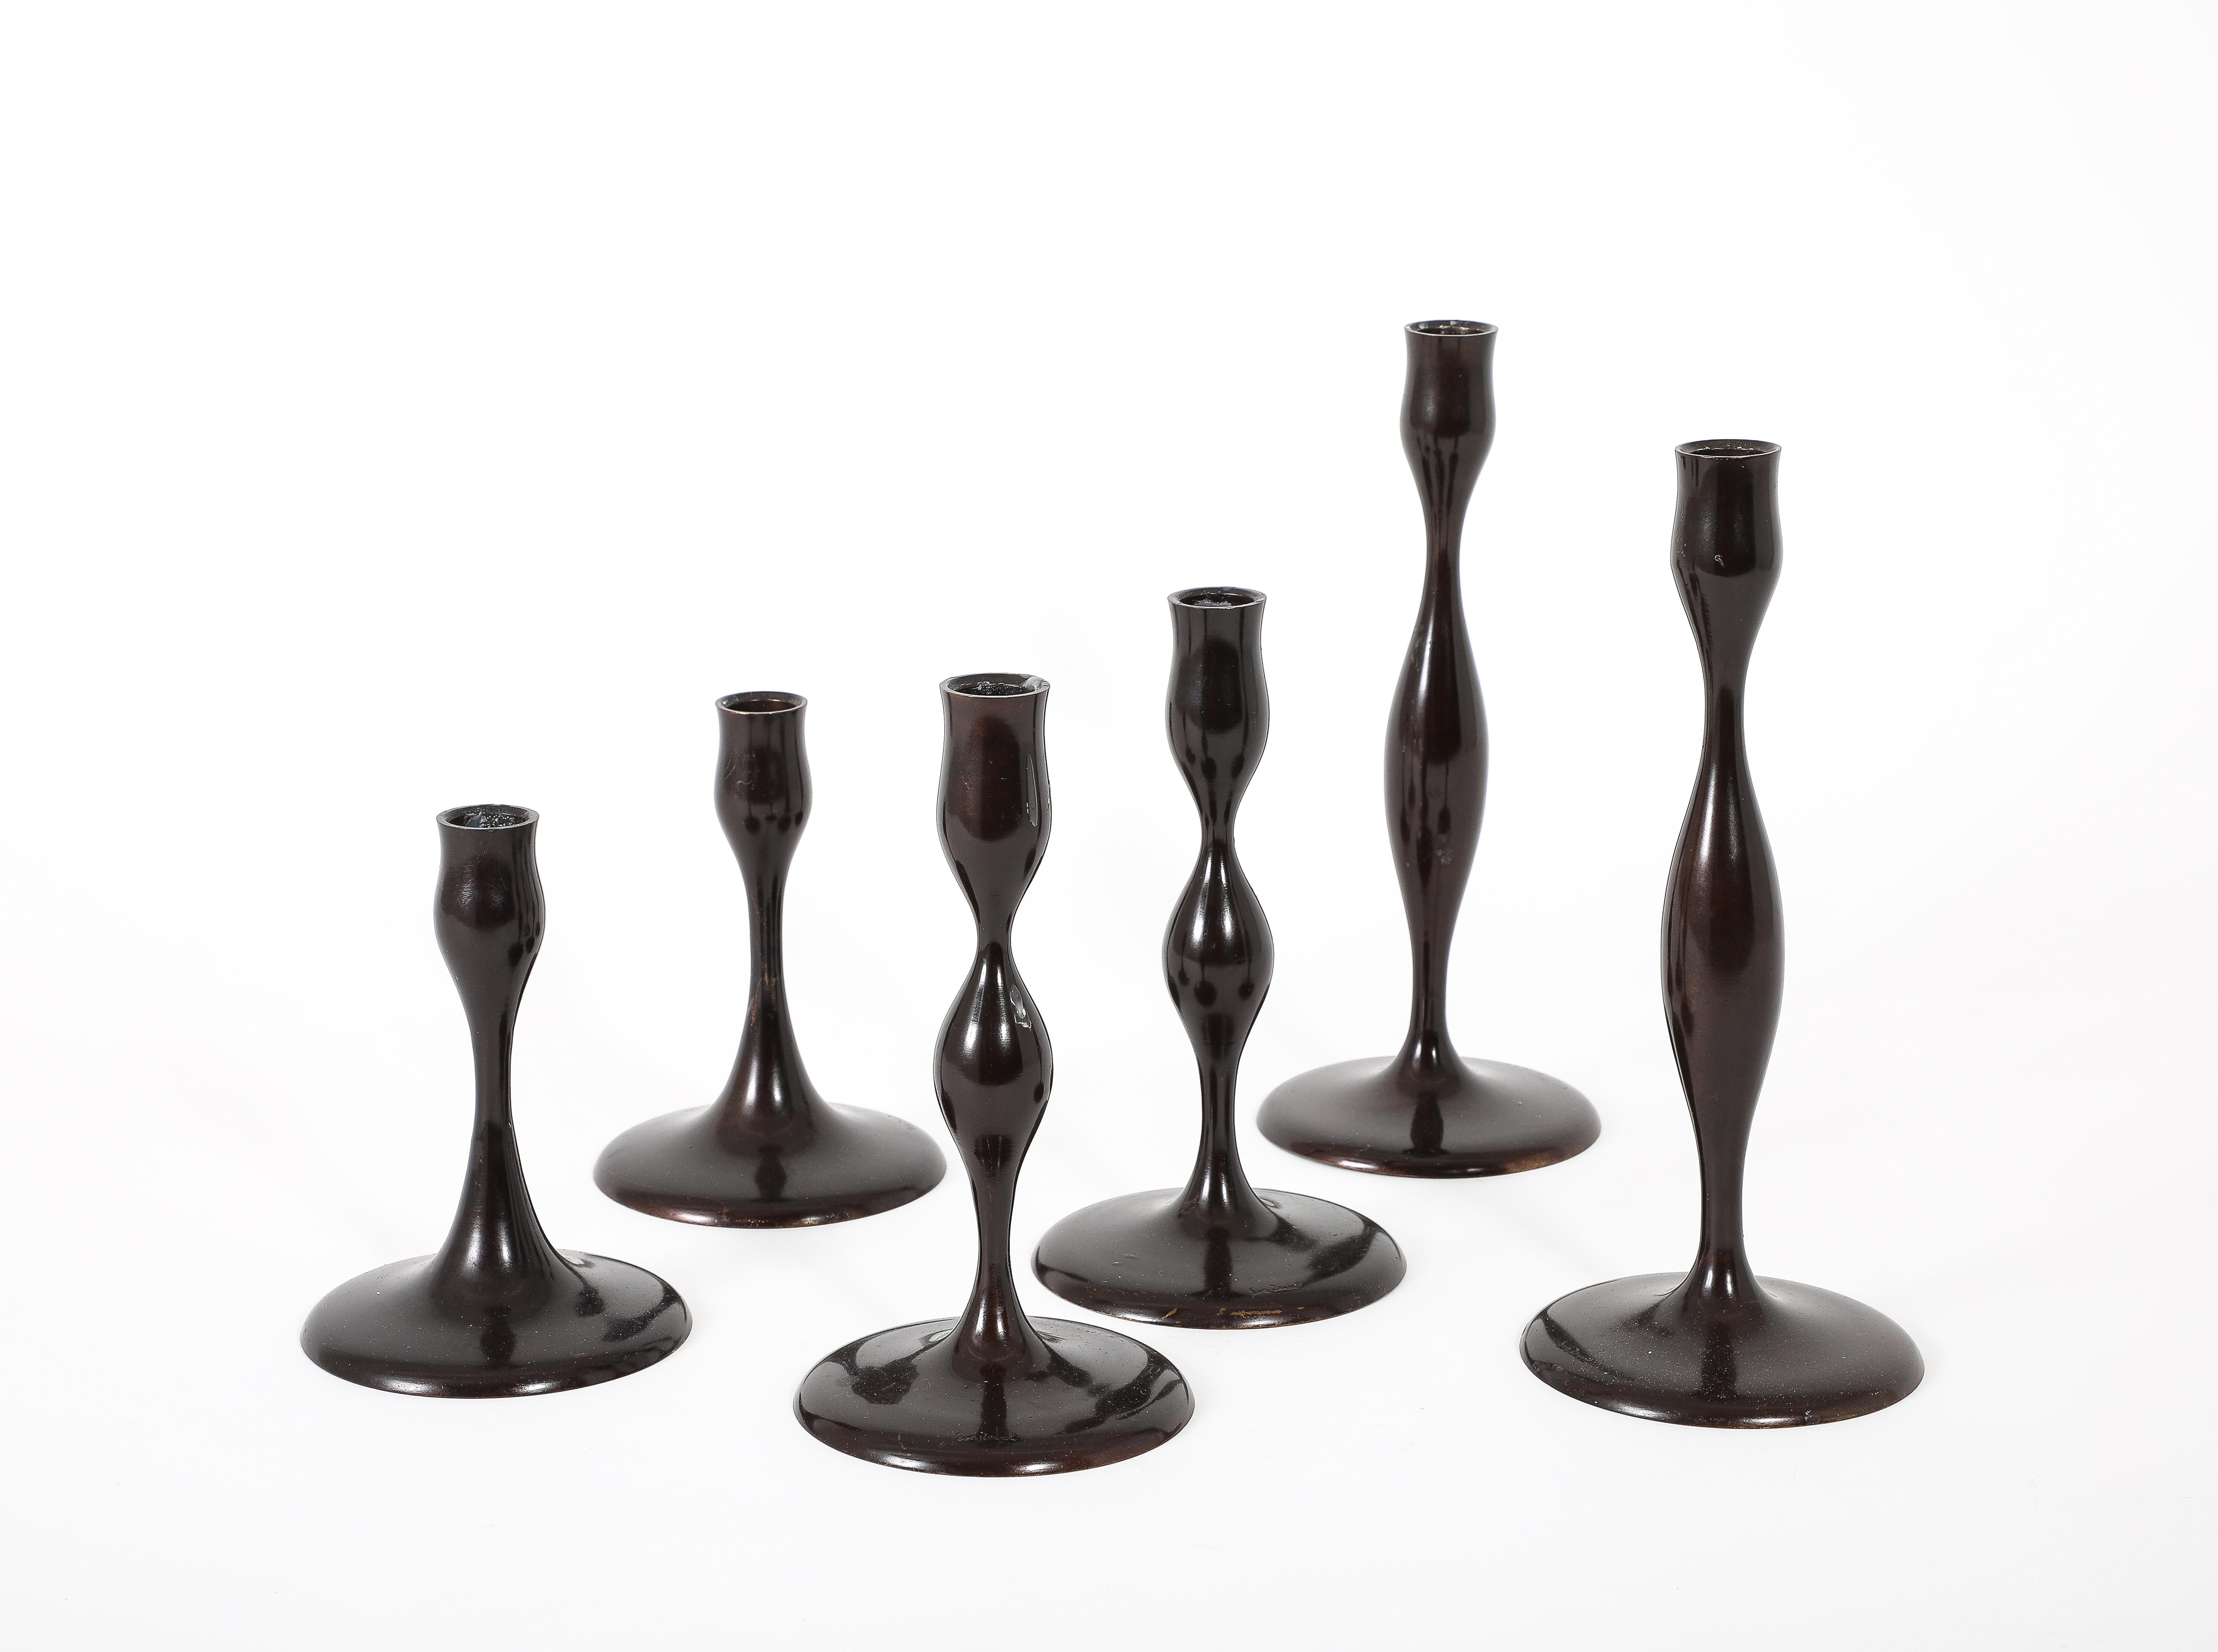 Rare set of Bronze candlesticks by Eva Zeisel in 2007 at 101 years of age, this is the complete set of sizes at 6”, 8” and 11”, From the “Originals” line, signed to base and no longer in production.
